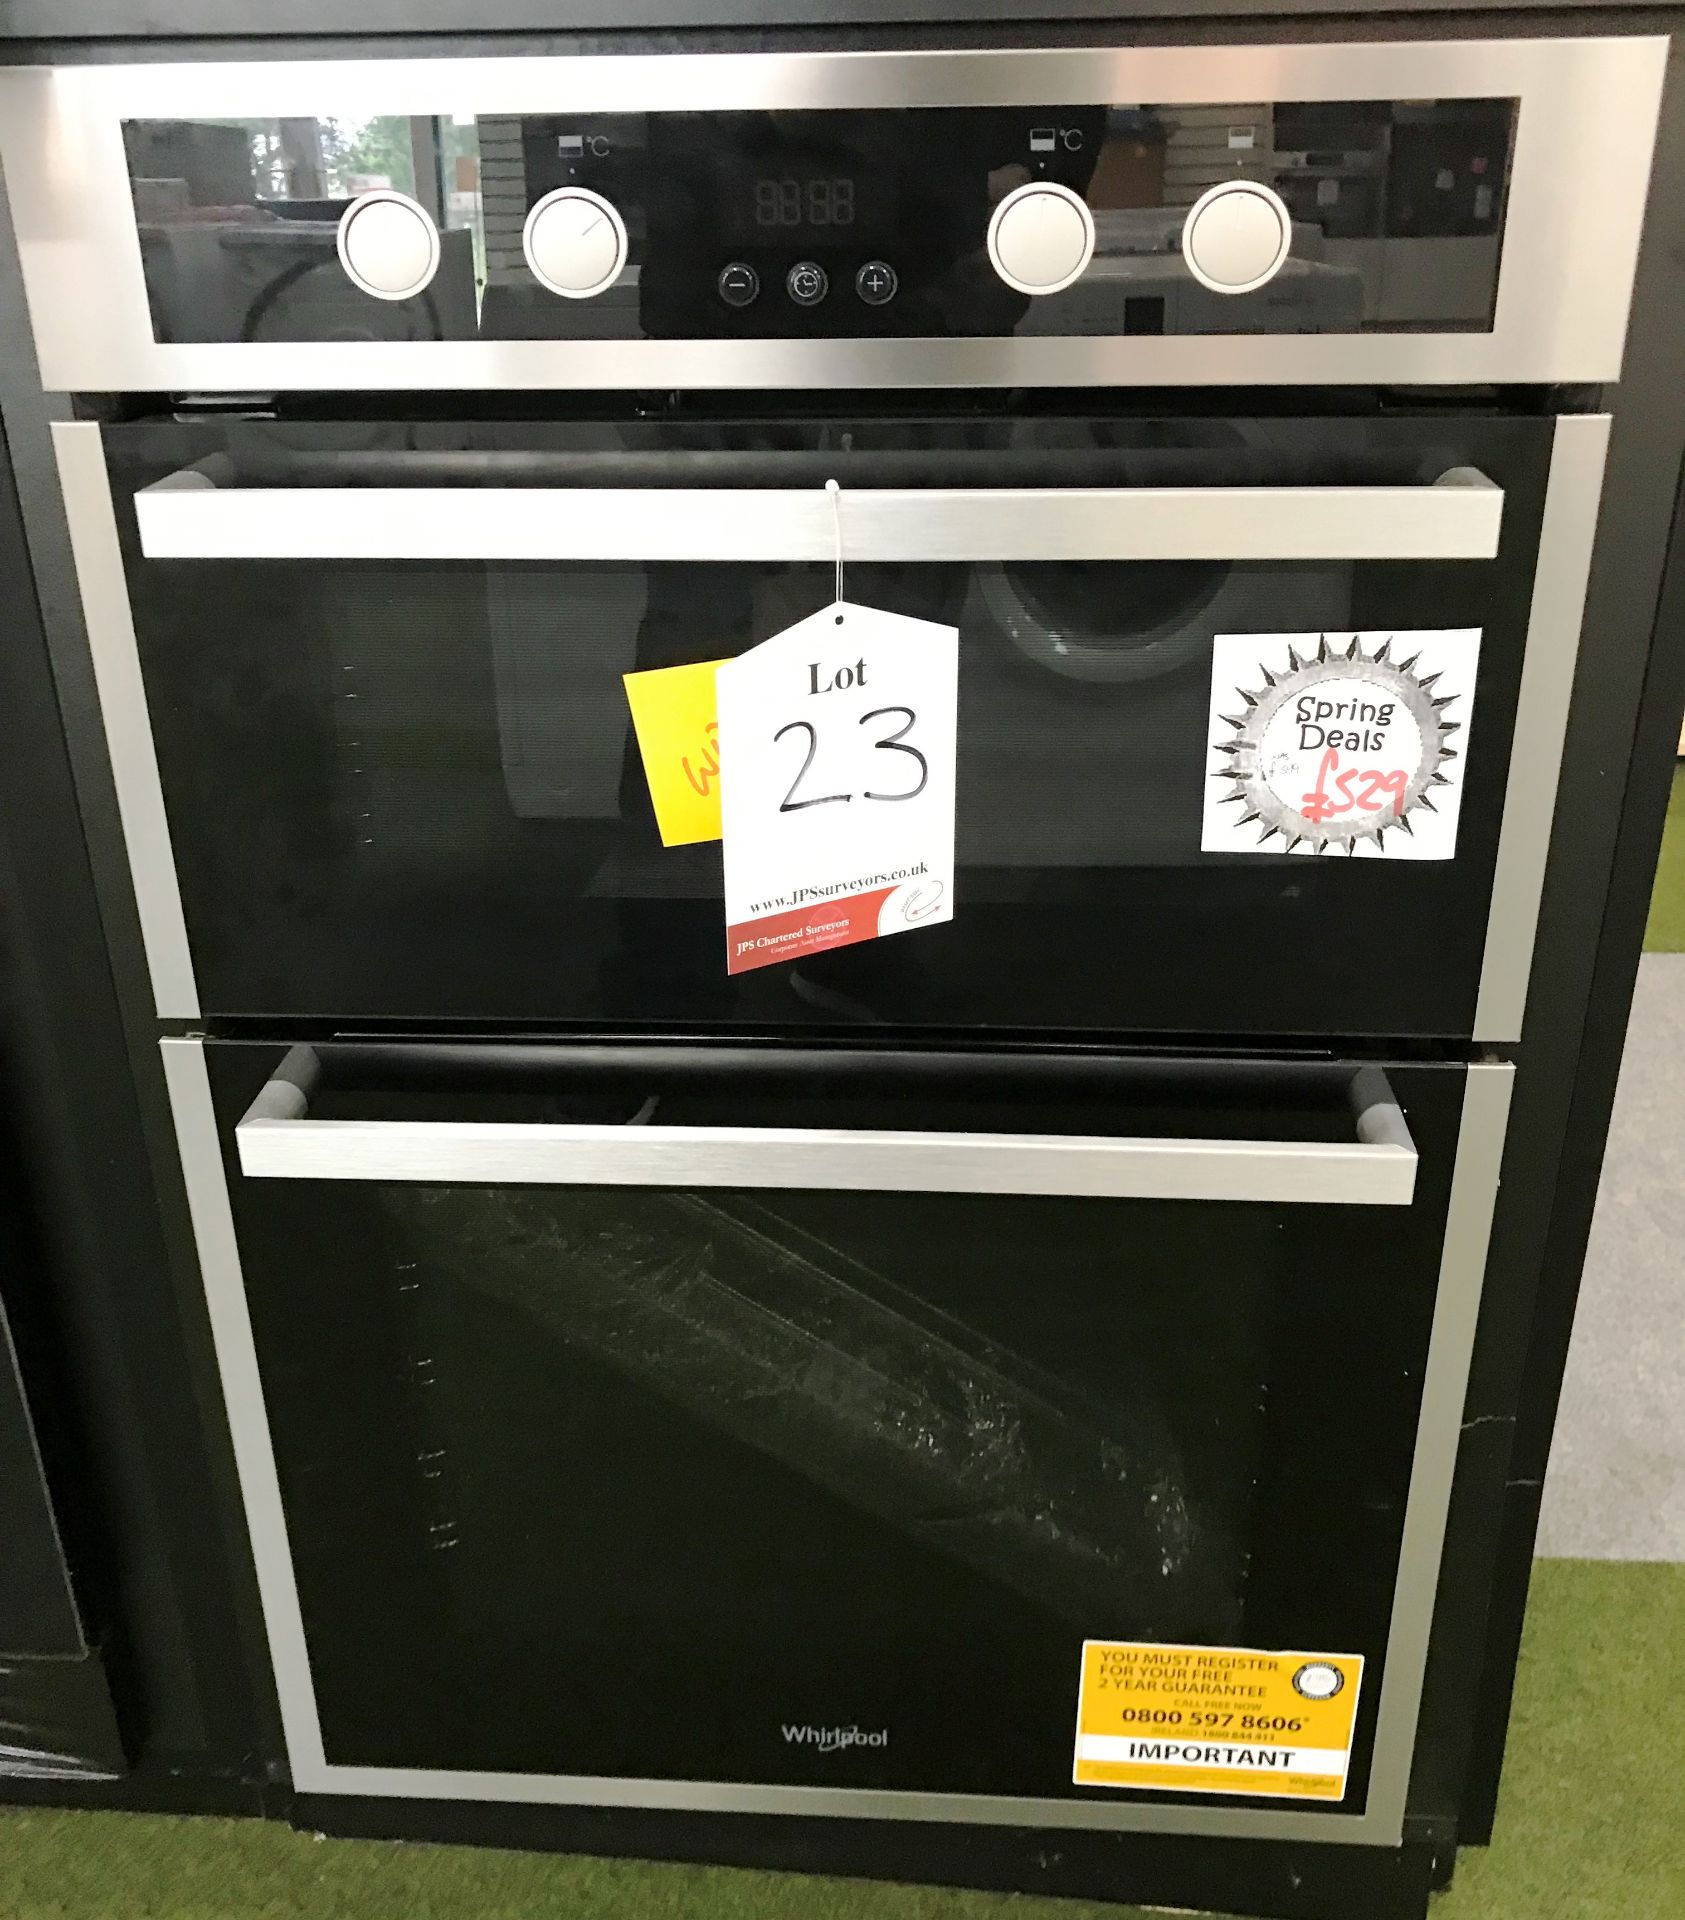 Ex Display Whirlpool AKL309IX Built In Double Oven - Stainless Steel - RRP£529